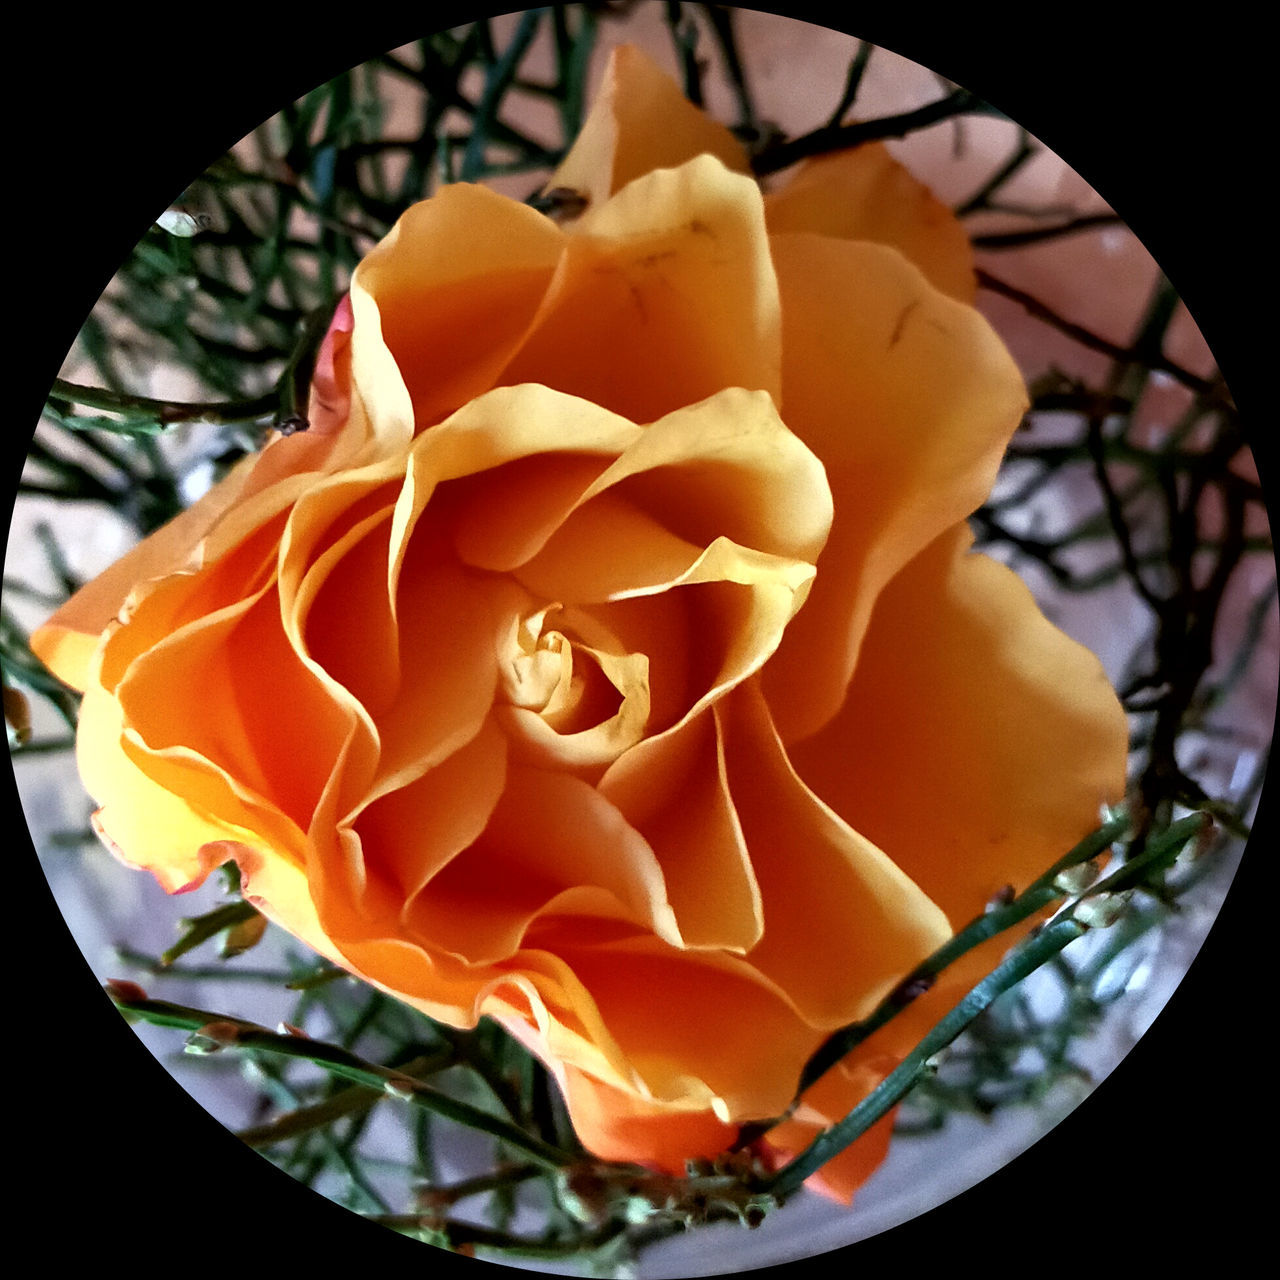 flower, yellow, rose, freshness, beauty in nature, plant, flowering plant, close-up, petal, no people, nature, macro photography, black background, indoors, flower head, inflorescence, food, orange, fragility, food and drink, orange color, garden roses, studio shot, floristry